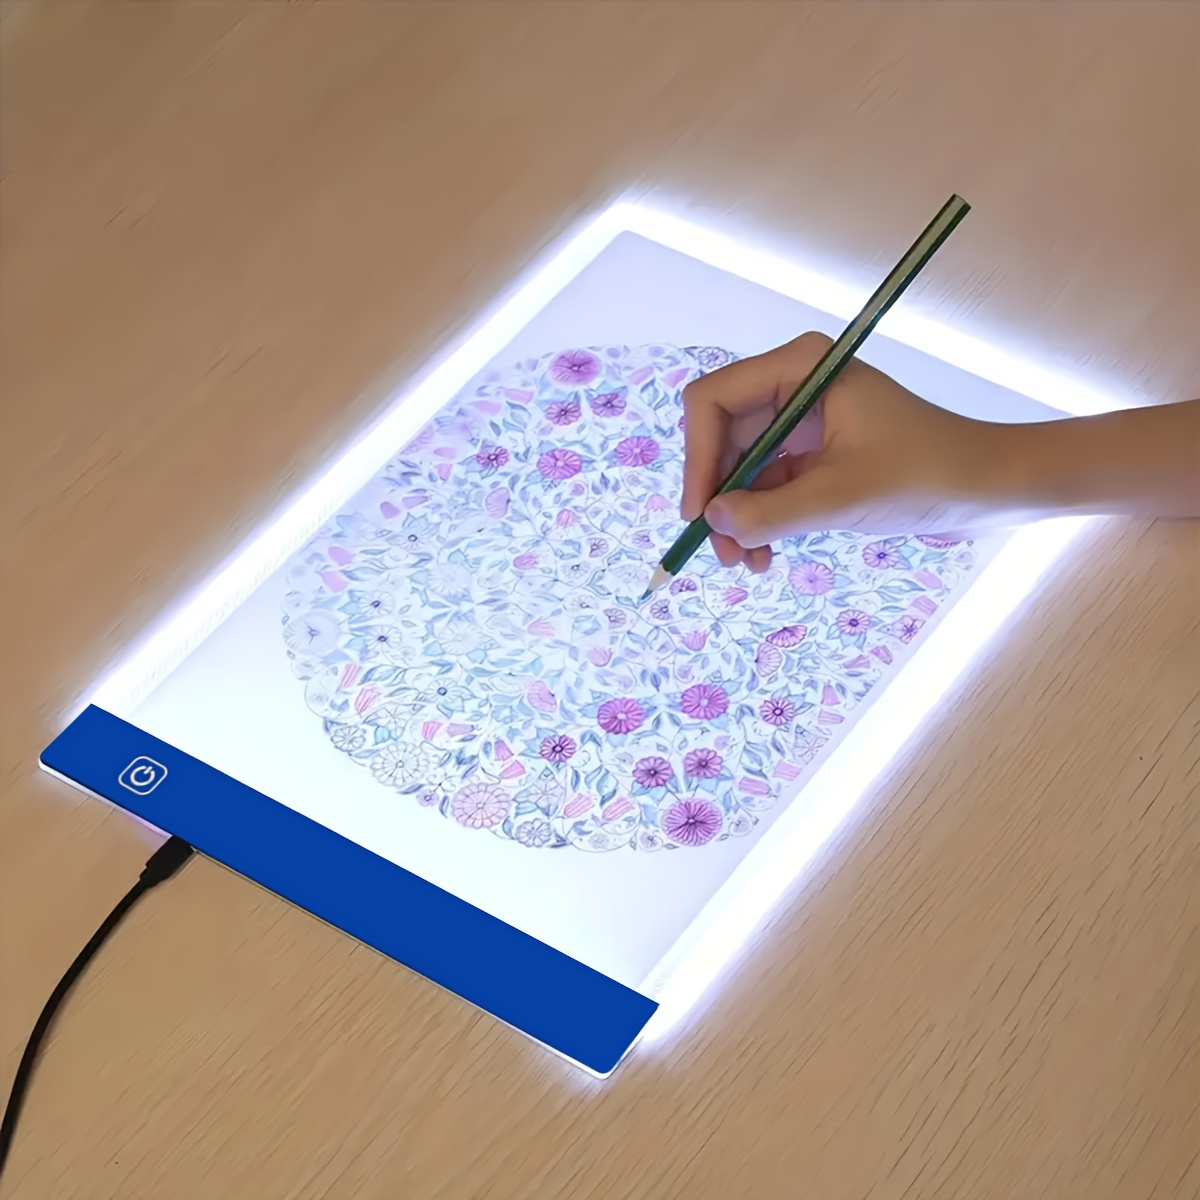 Comzler Light Box Tracing LED Board, A4 Magnetic Light Pad, Dimmable  Brightness LED Light Drawing Board, Sketch Pad LED Light Drawing Pad,  Cricuting